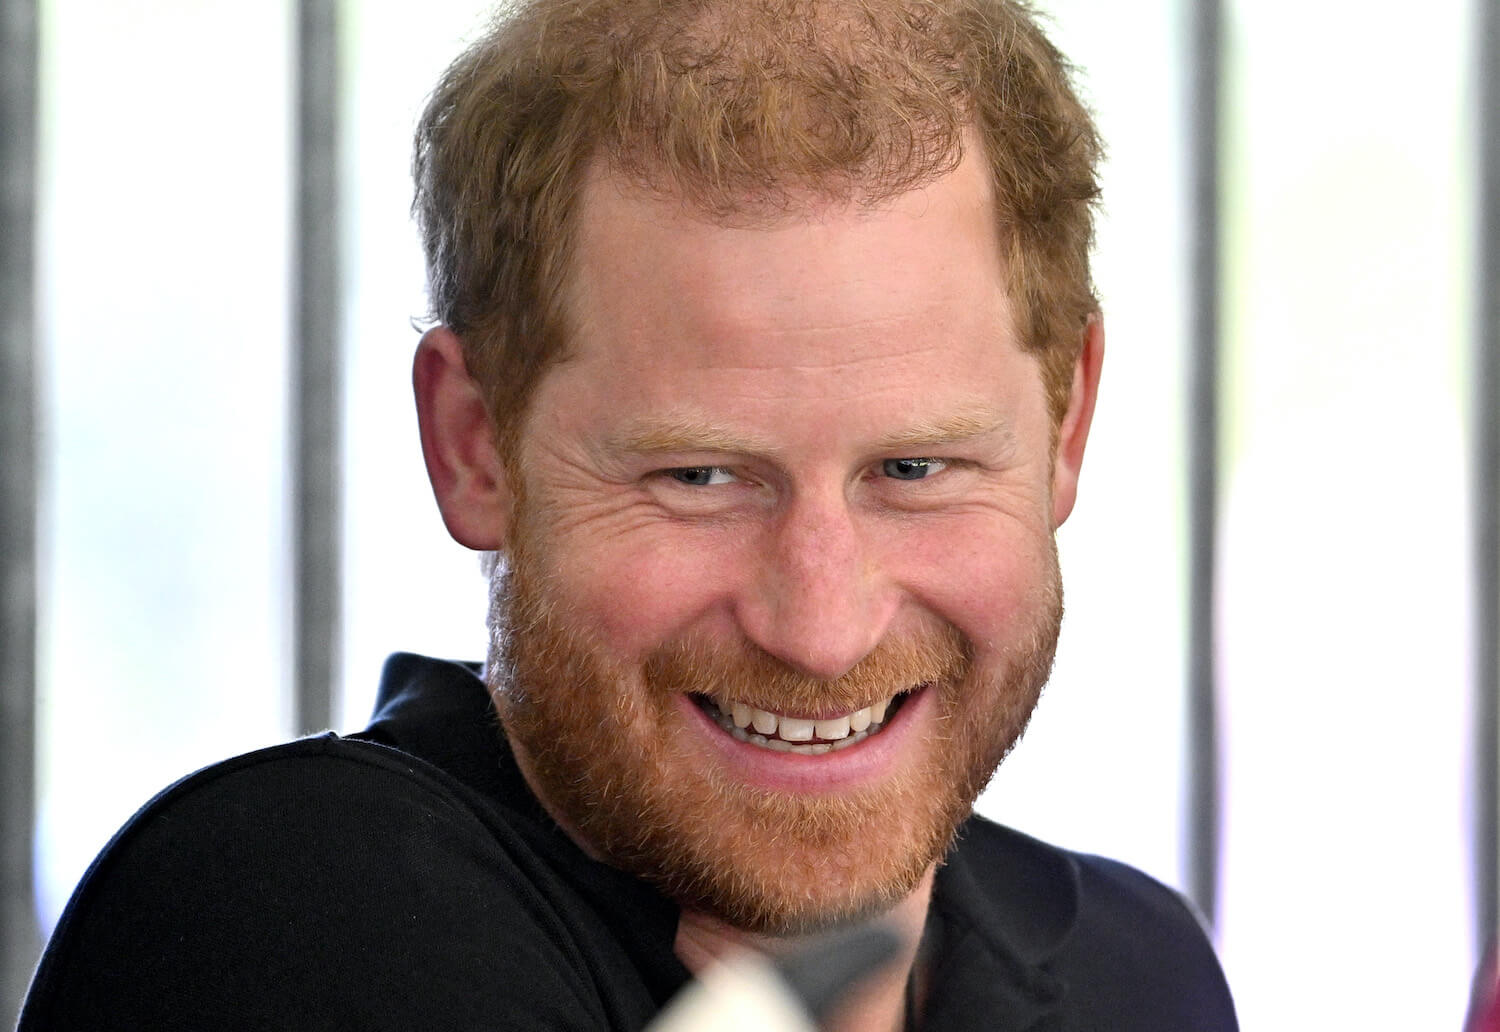 Prince Harry smiles while looking off to the side